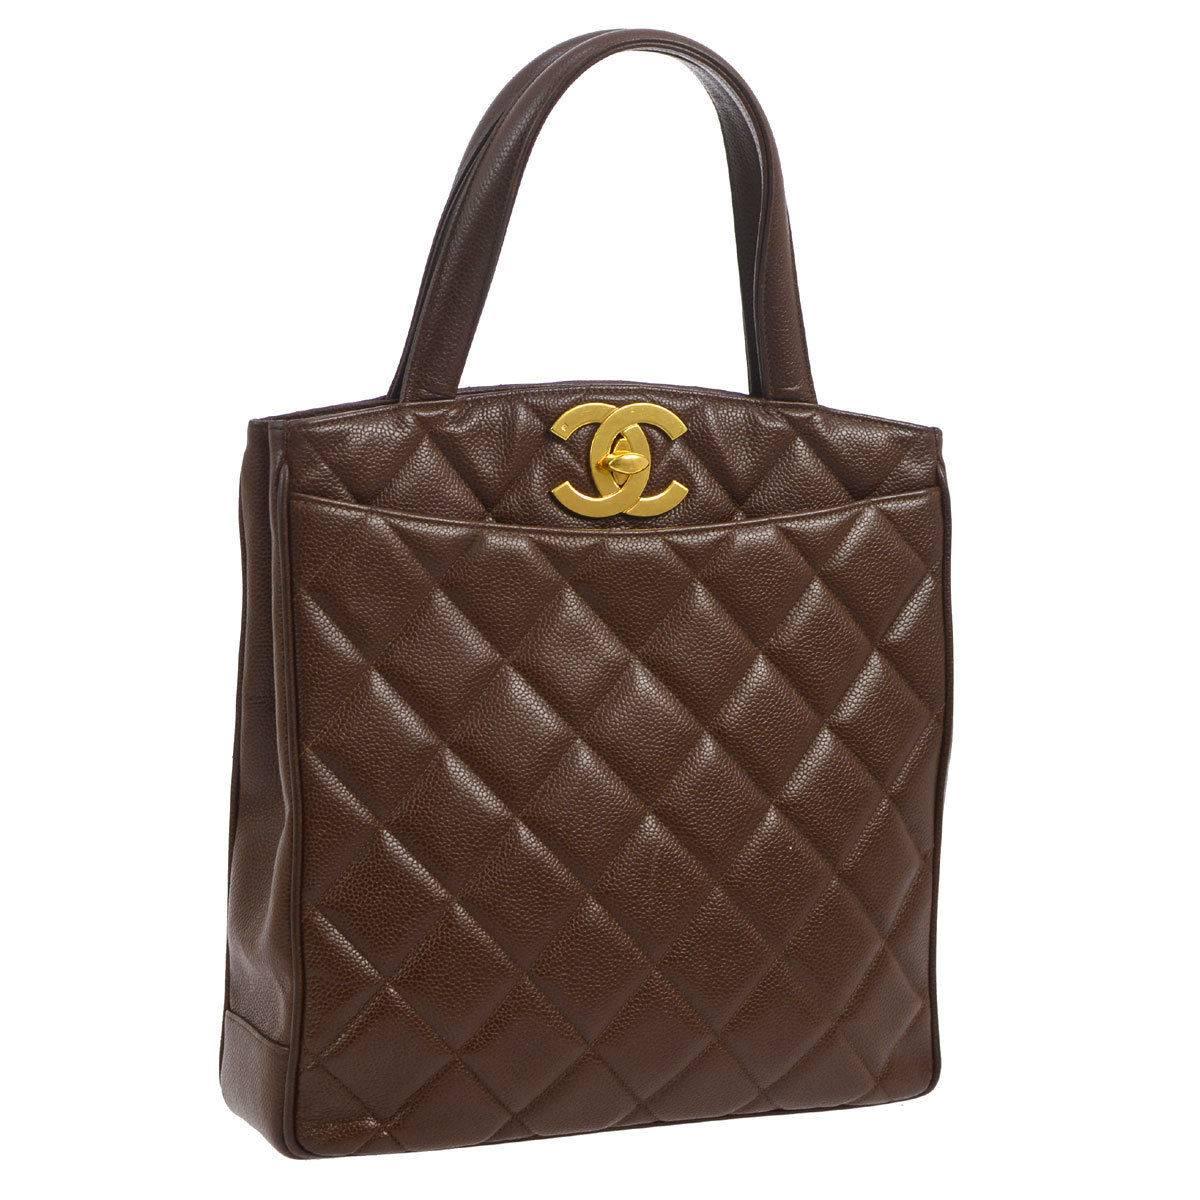 Chanel Caviar Leather Chocolate Top Handle Kelly Style Satchel Shoulder Bag